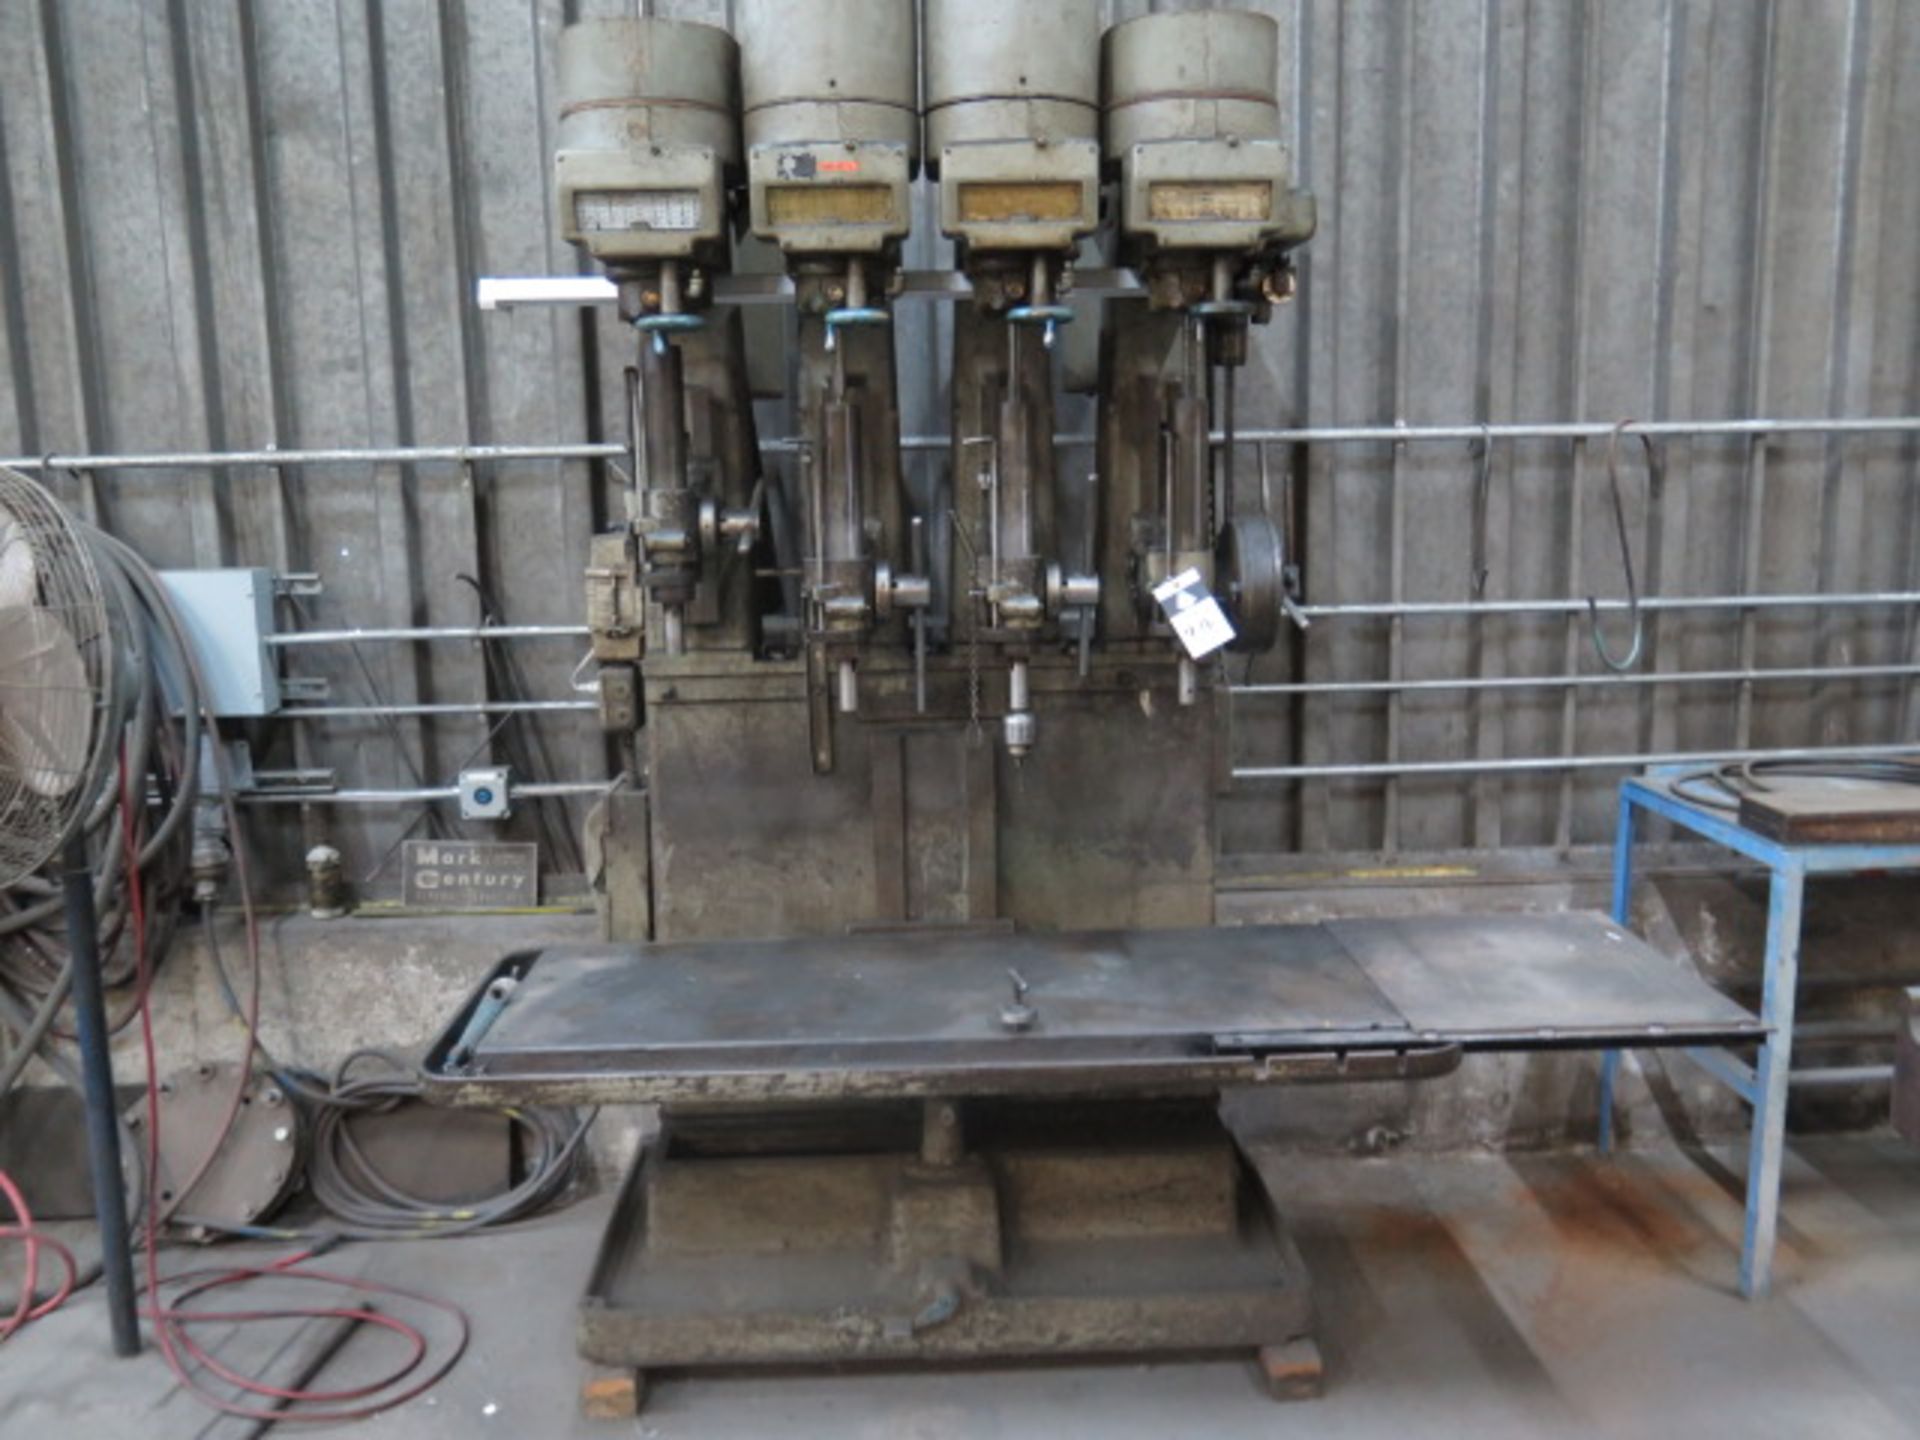 Leland-Gifford 4-Head Gang Drill Press w/ No. 2 Drill Heads, 20” x 56” Table (SOLD AS-IS - NO